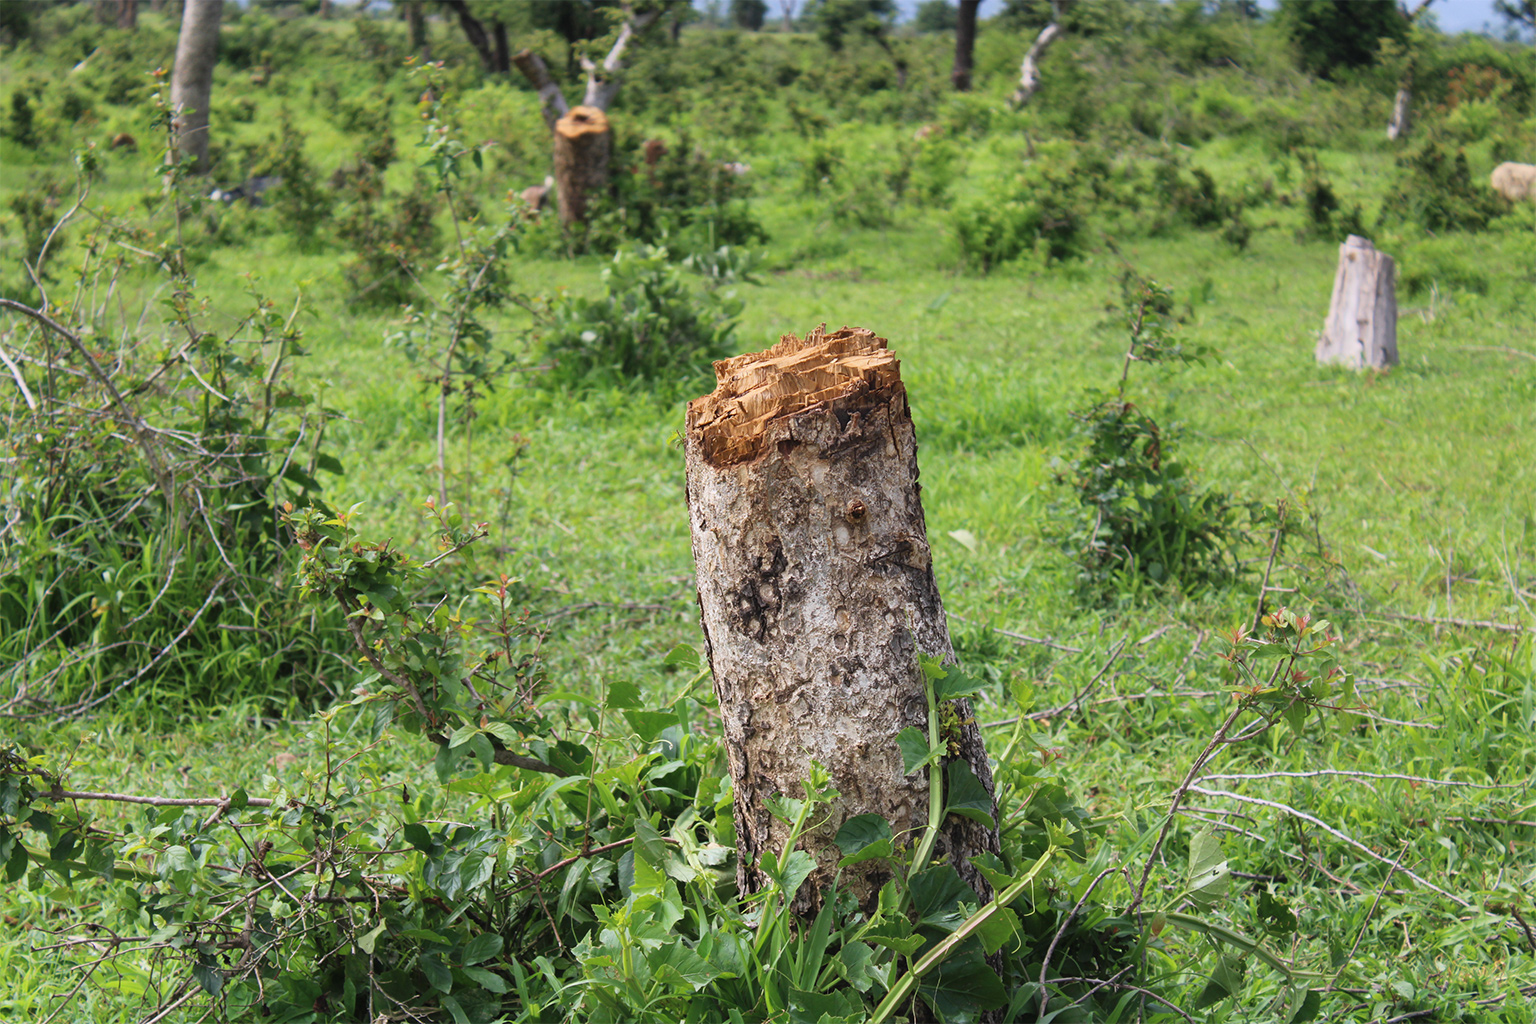 Trees illegally cut down for firewood in the Zamay forest reserve by Nigerian refugees.